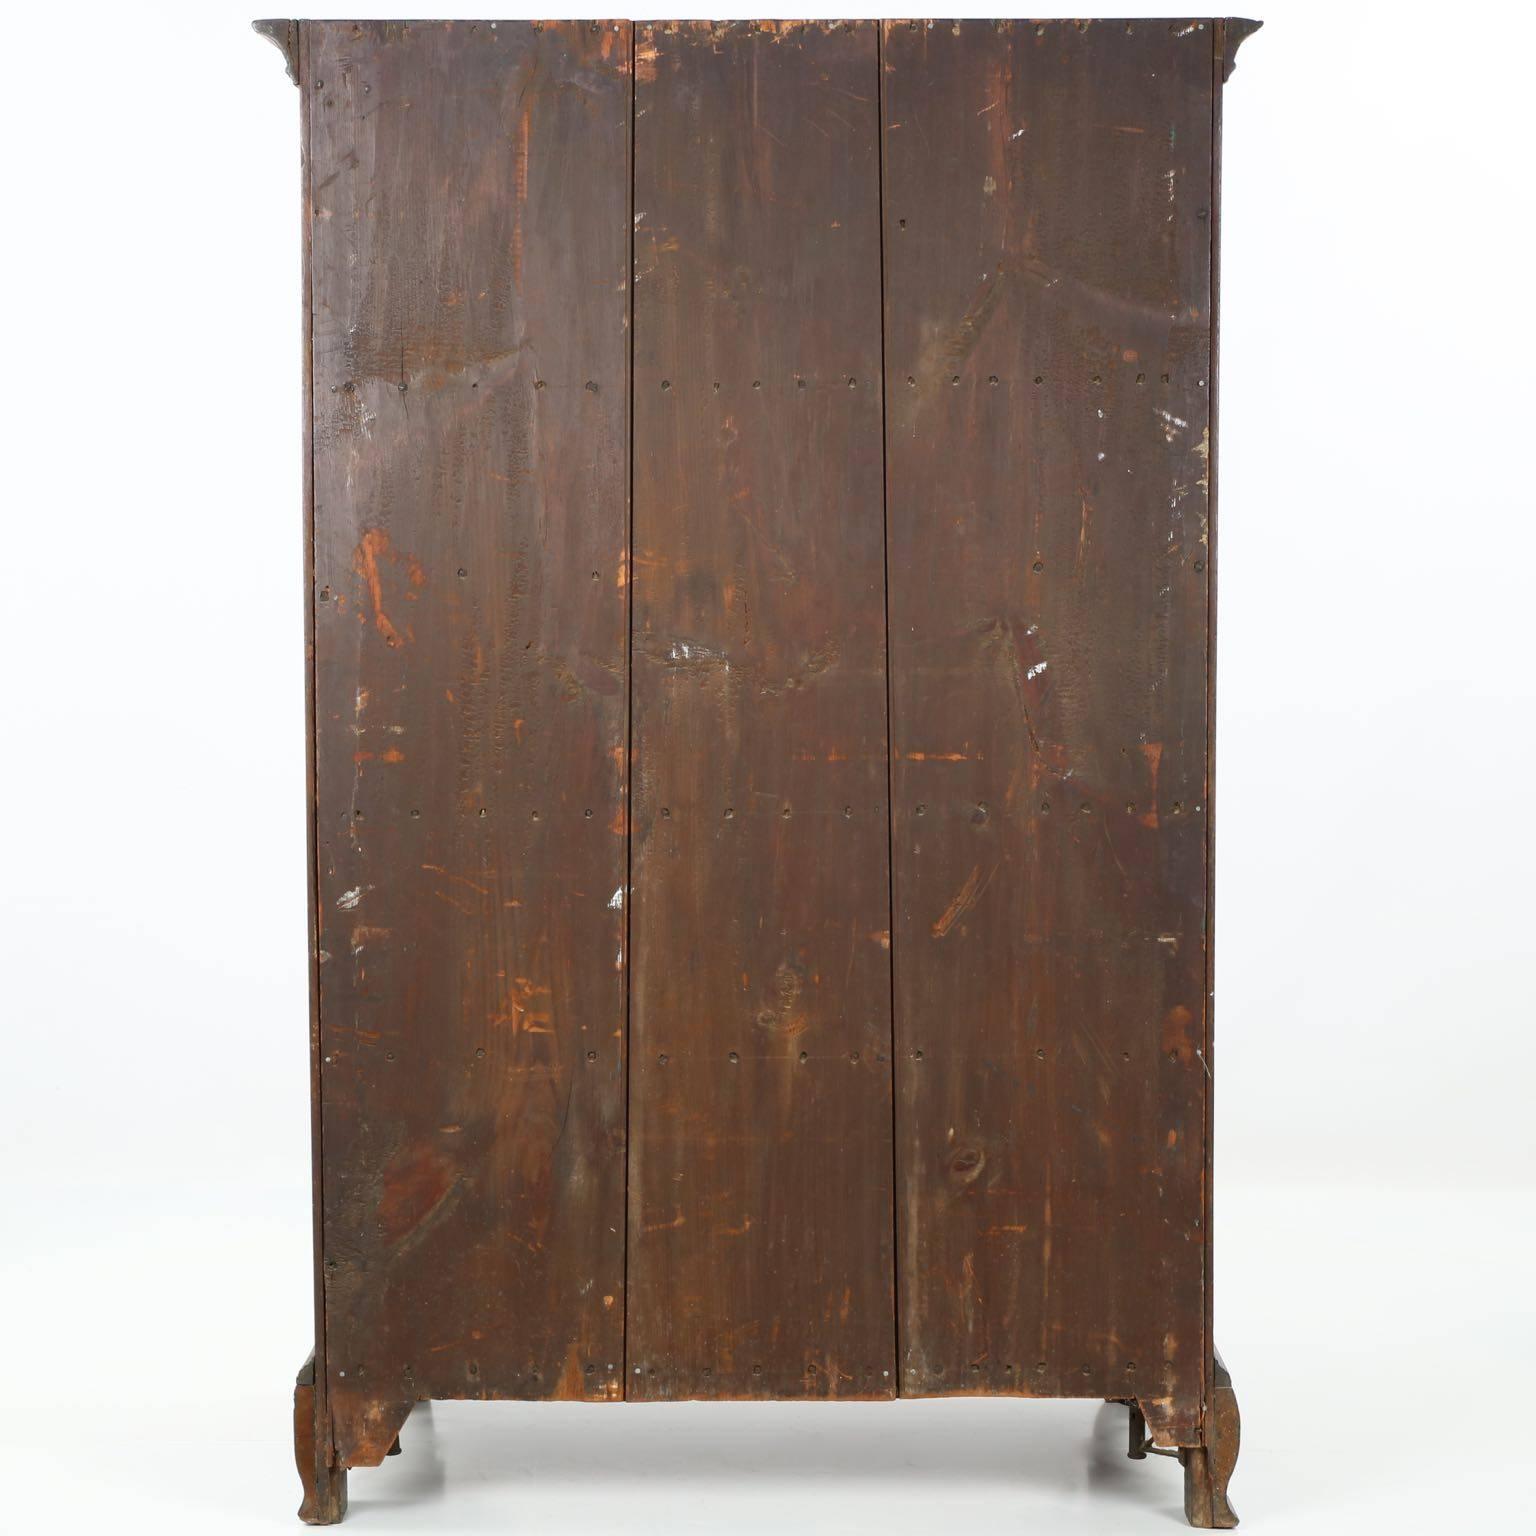 18th Century American Chippendale Walnut Tall Chest of Drawers, Pennsylvania circa 1780